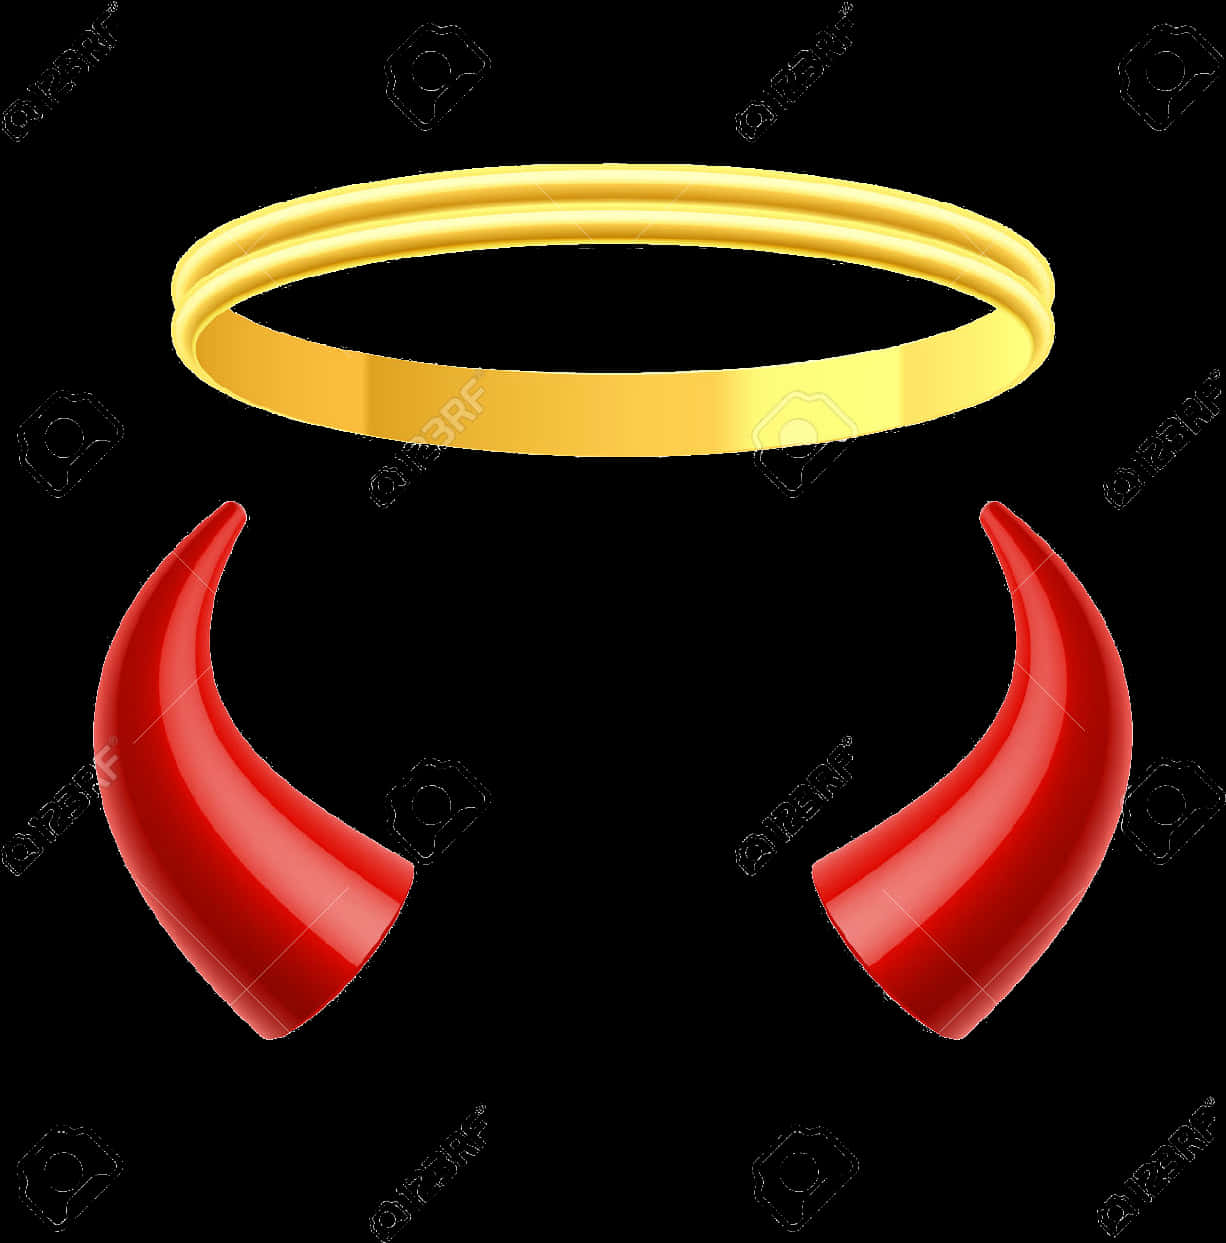 Devil Hornsand Halo Graphic PNG image